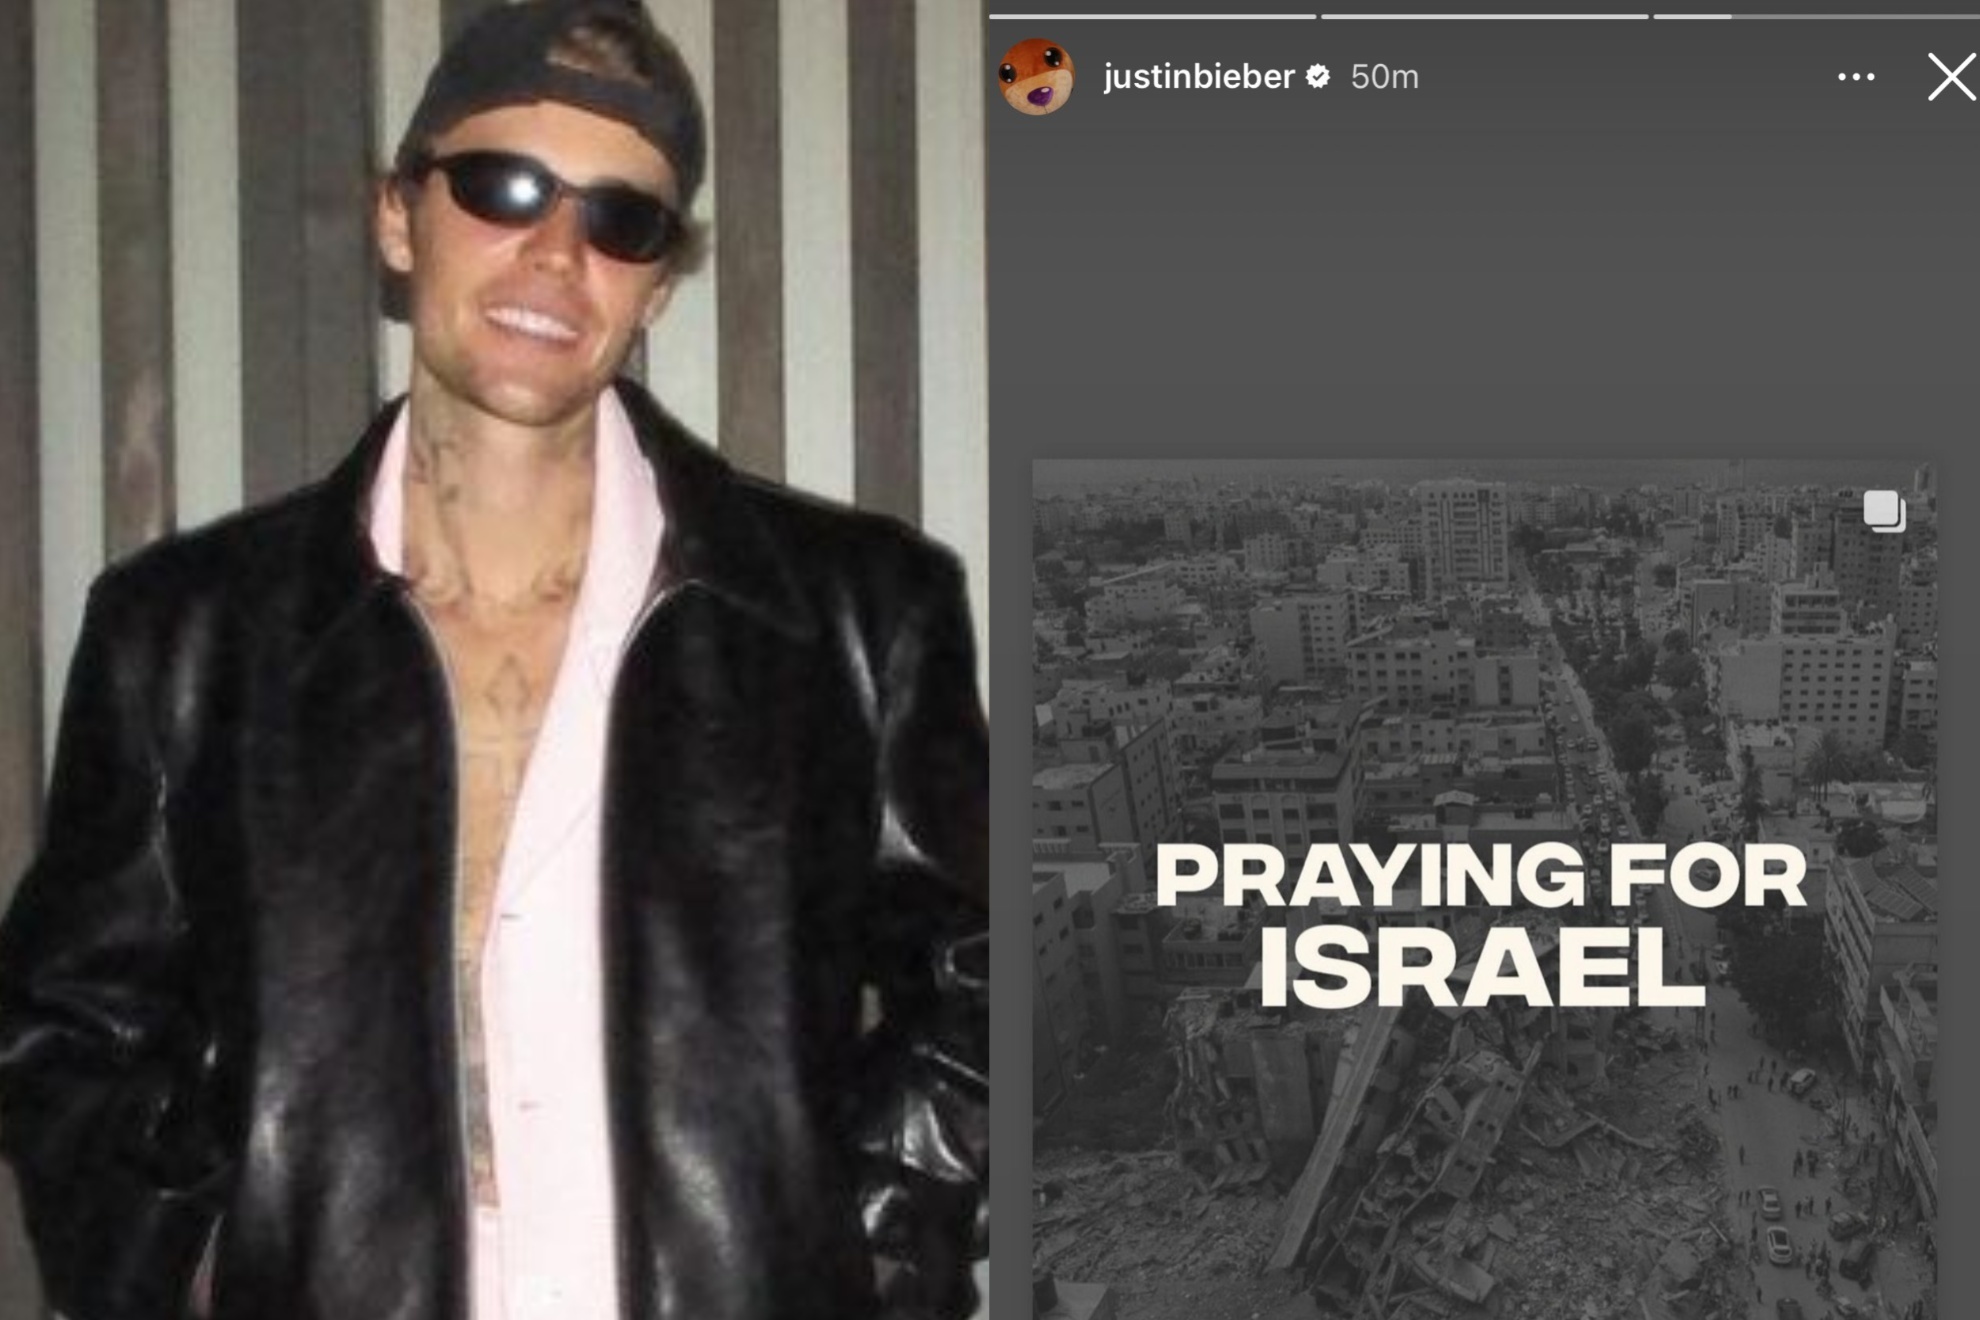 Justin Bieber took down a photo from his Instagram stories about the war in Israel